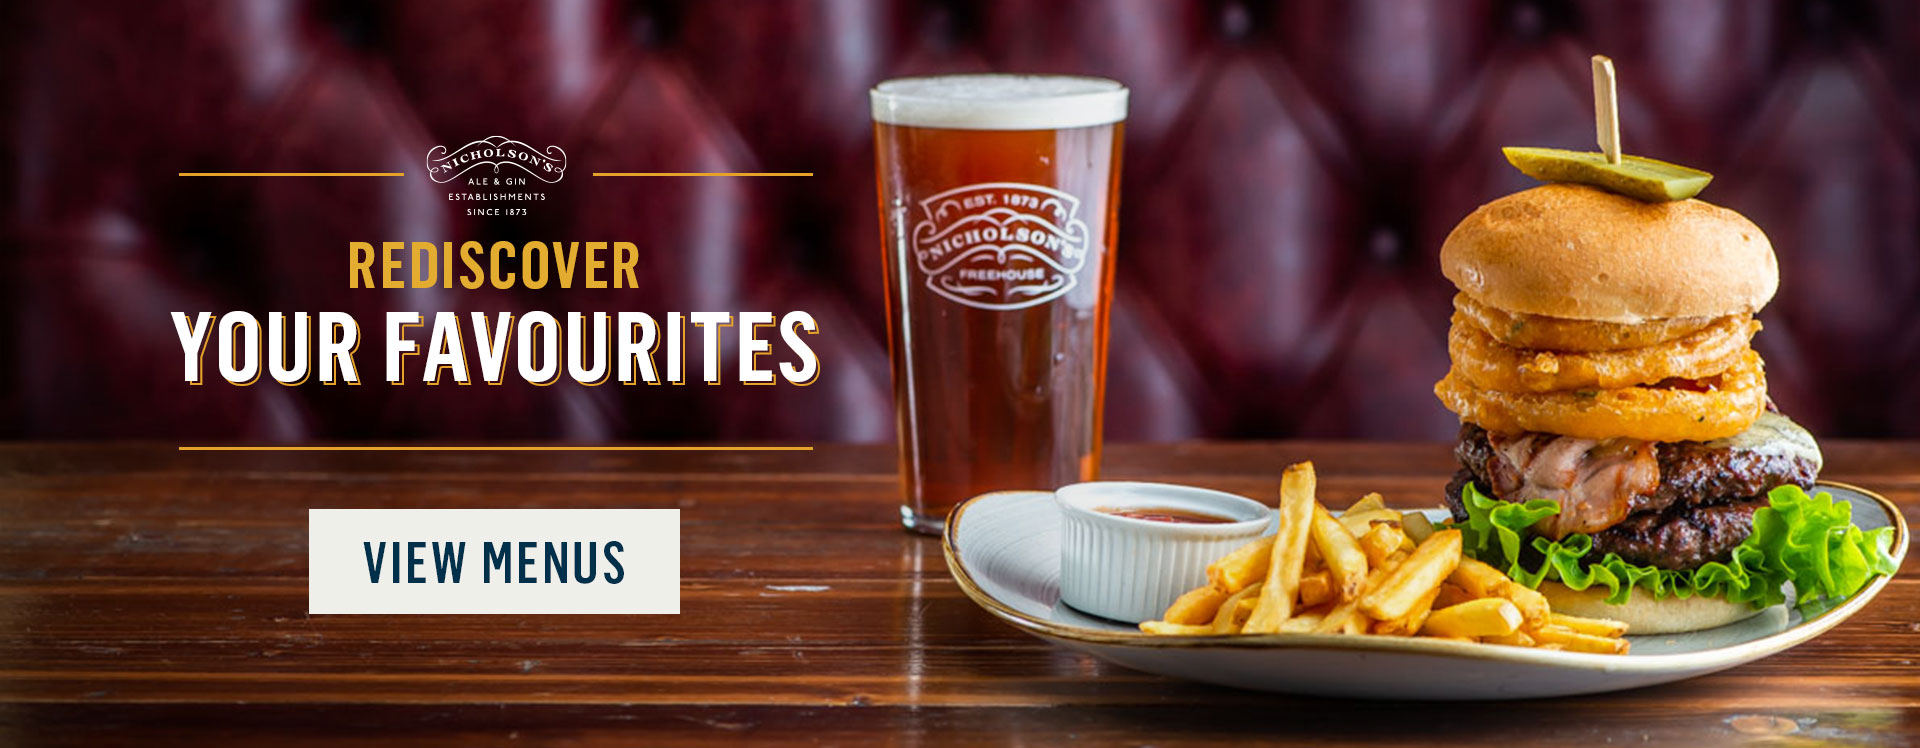 Rediscover your favourites at Harkers